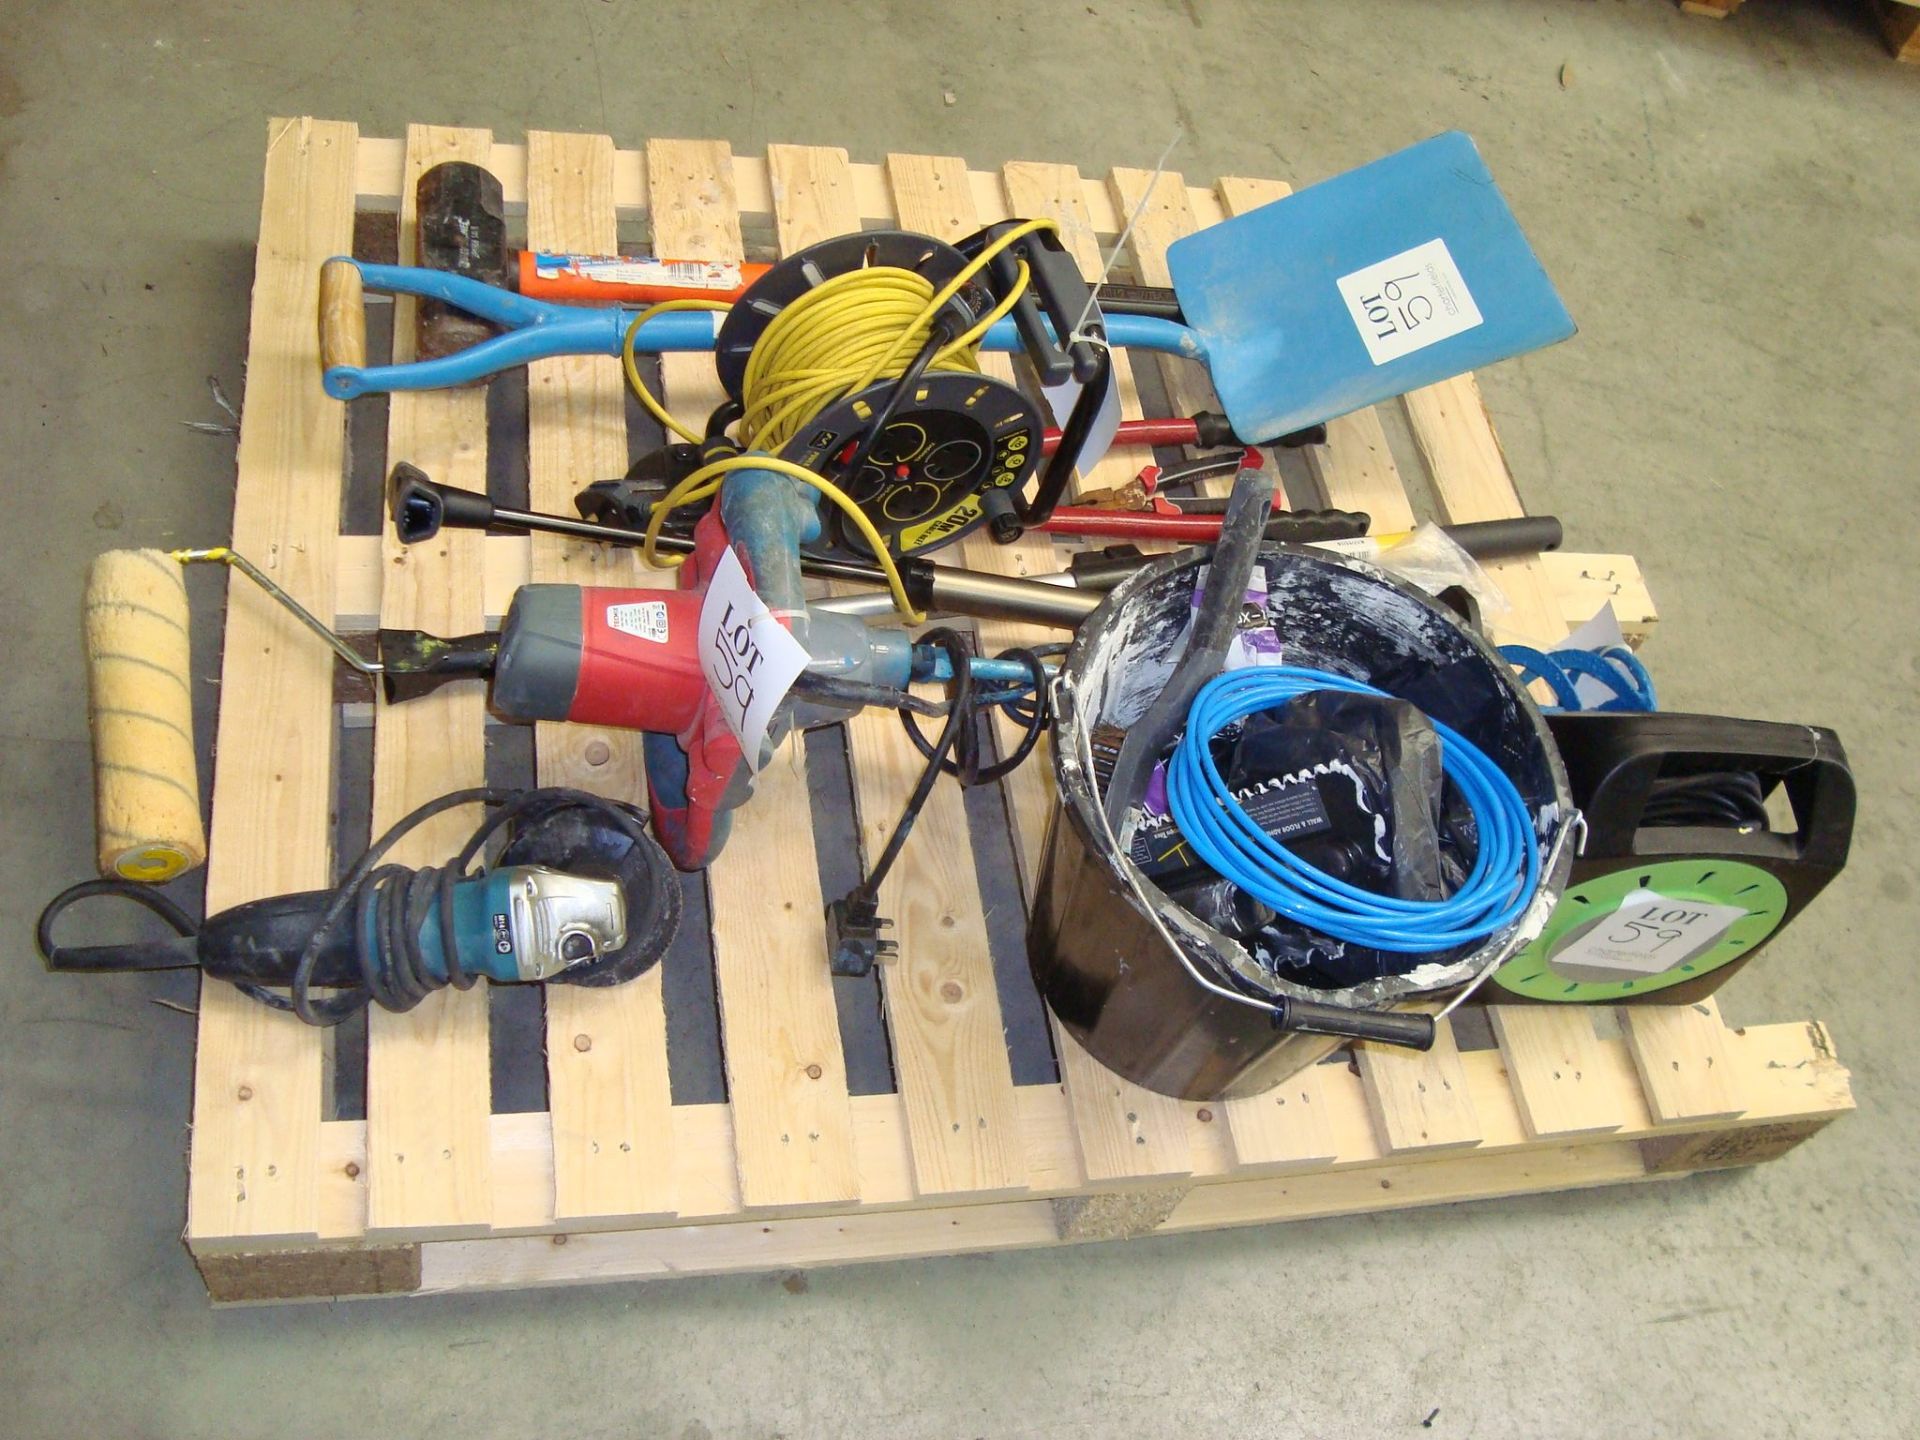 A quantity of general hand and power construction tools, together with two wheelbarrows, as lotted